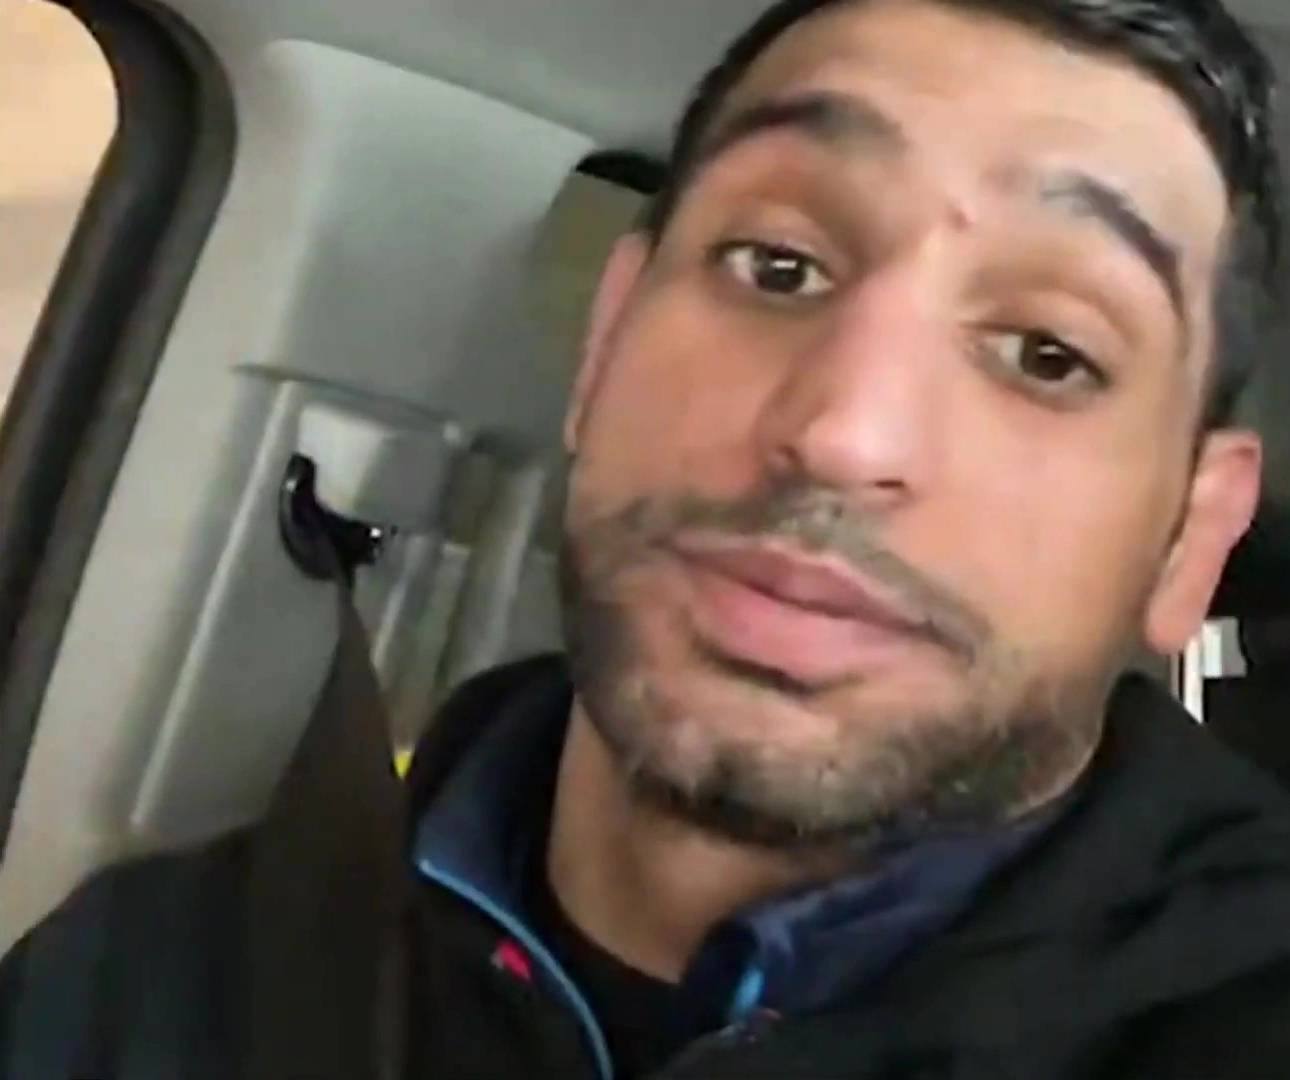 Amir Khan lands himself in hot water for live stream in his car